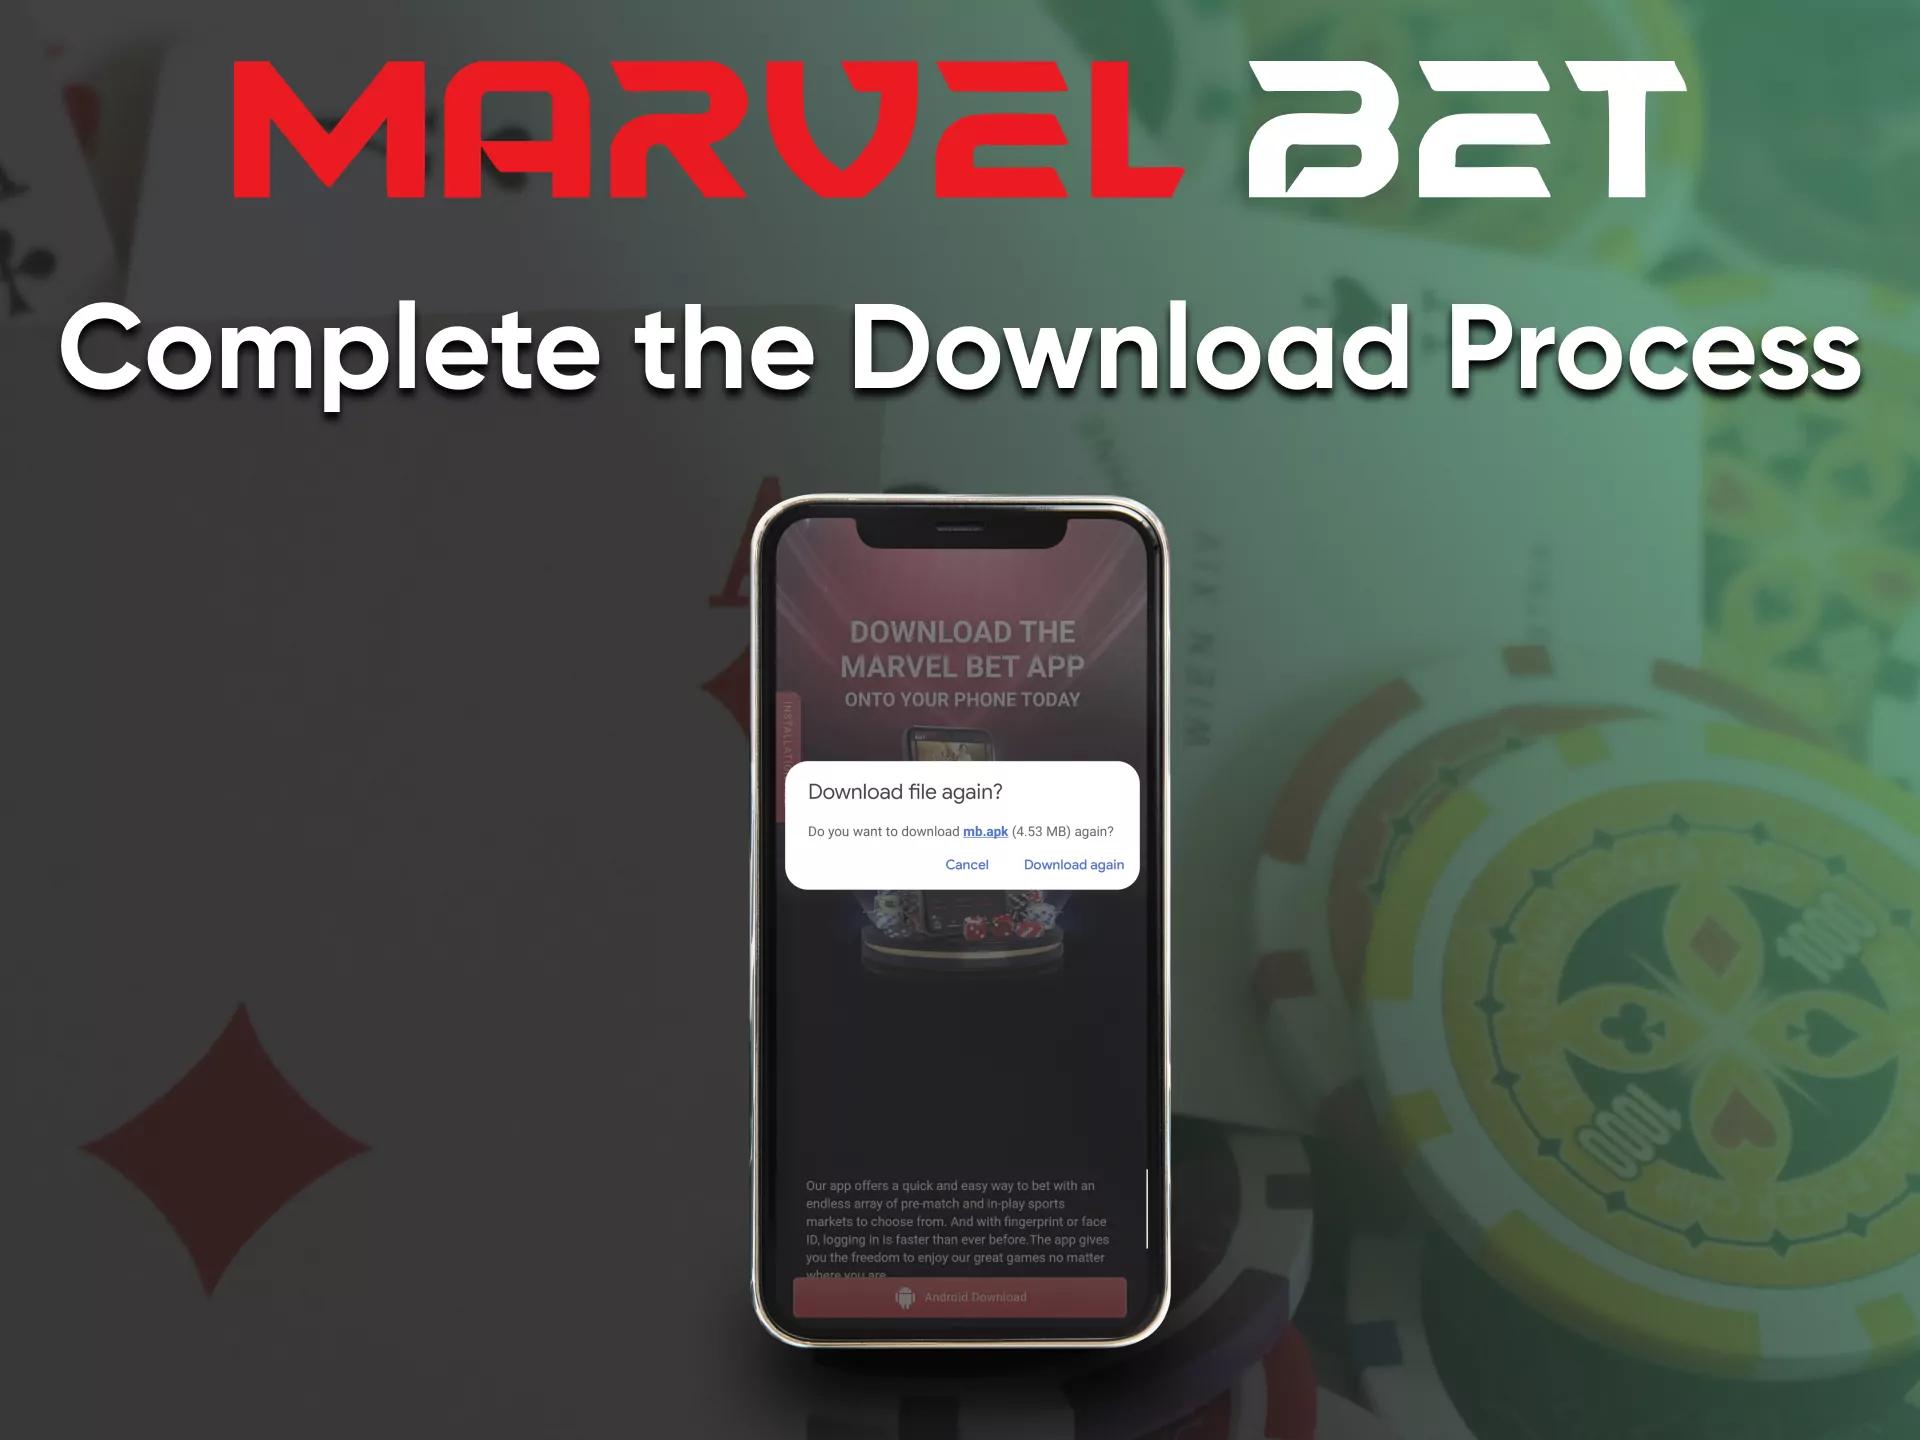 Install the application for casino games from Marvelbet.